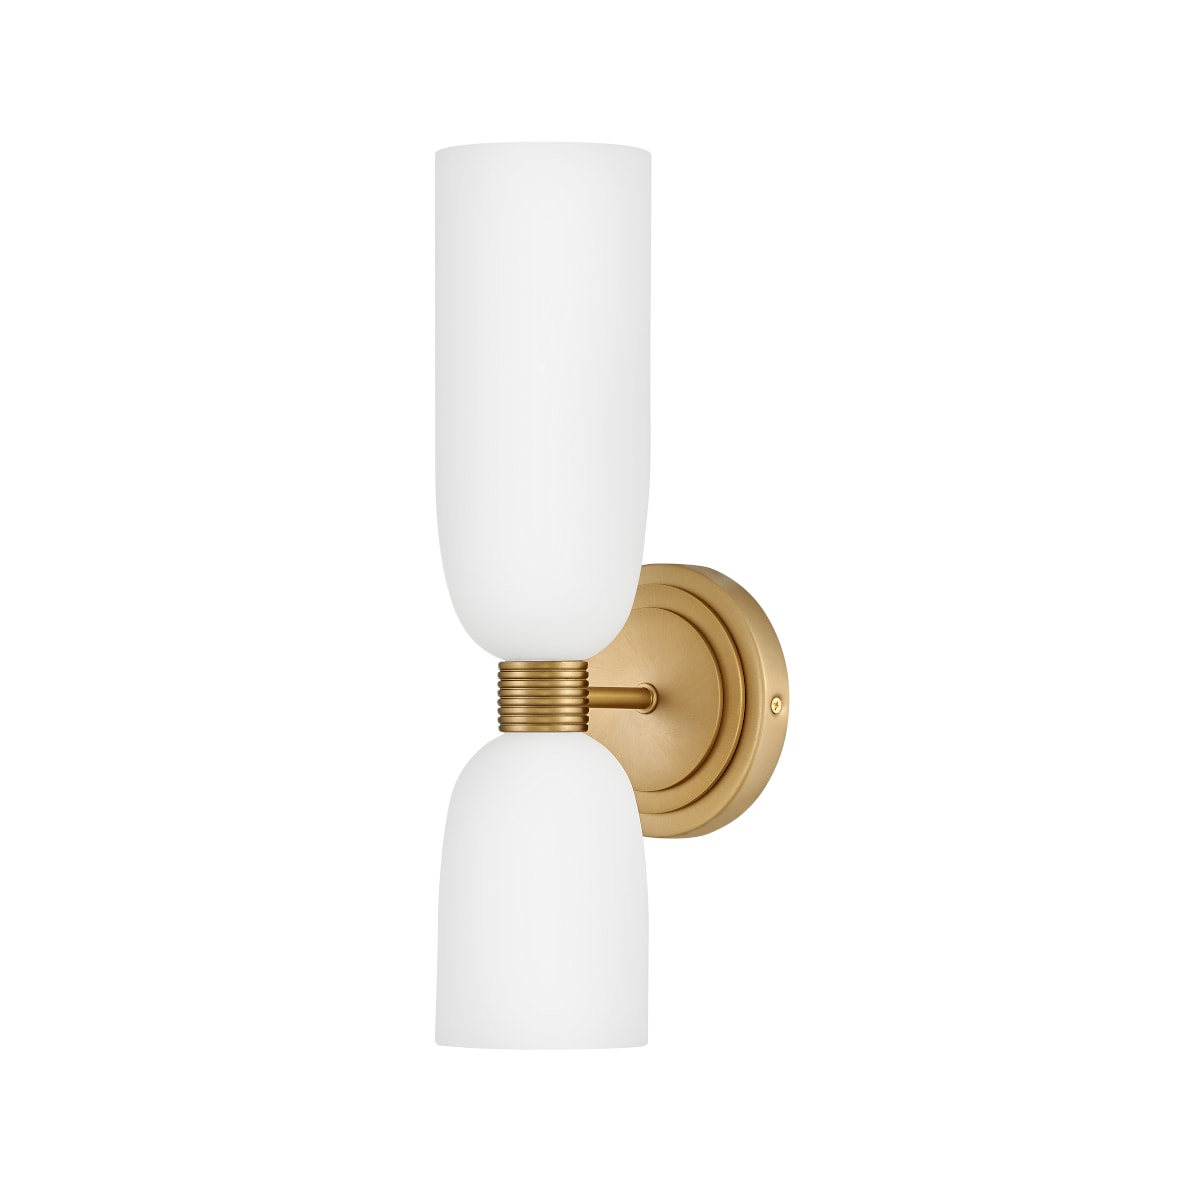 Product image of Tallulah Brass Wall Light with Opal Glass